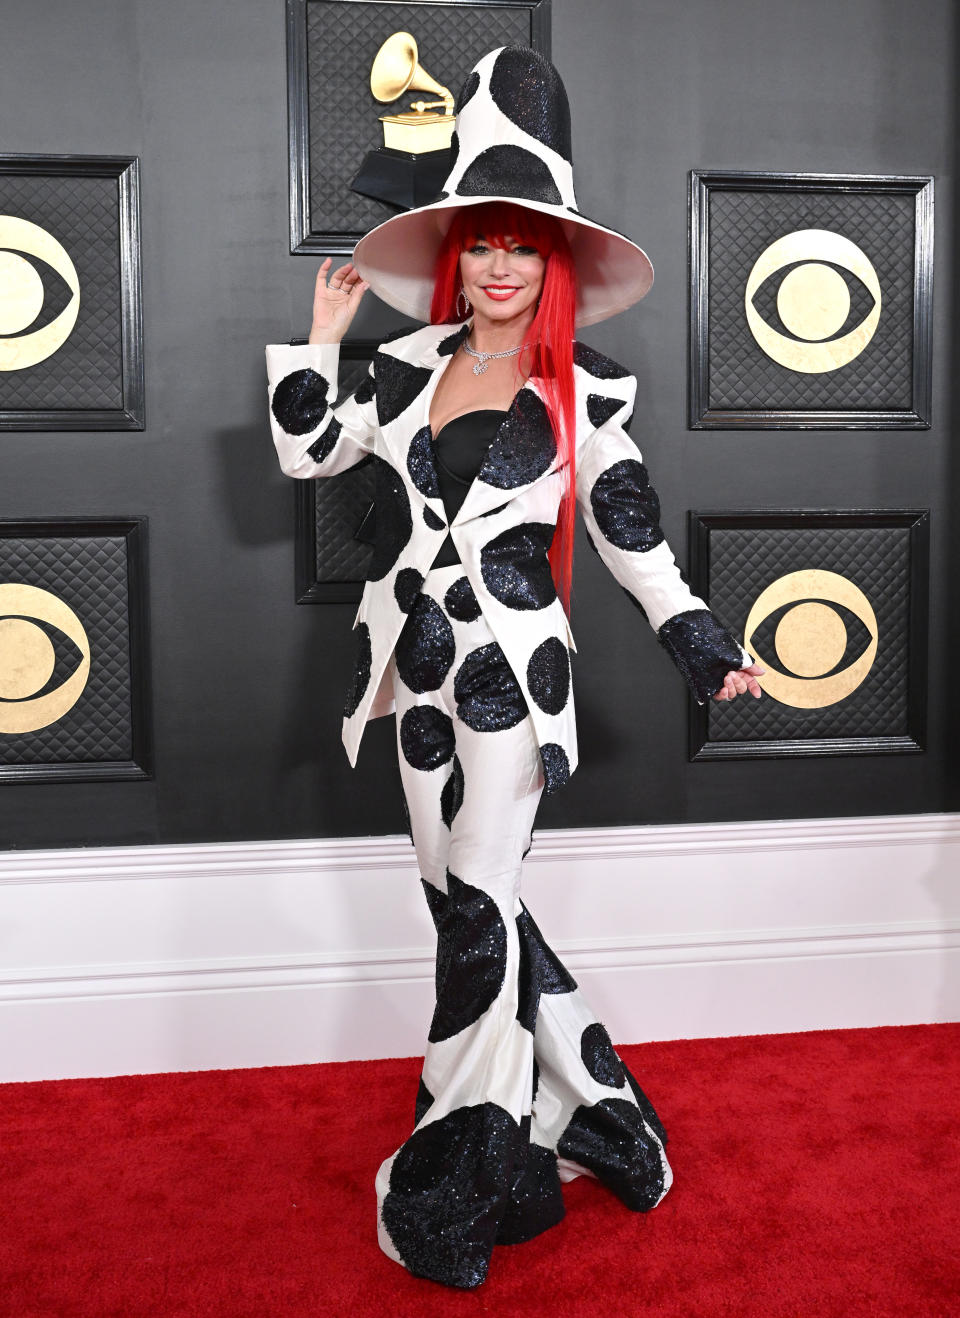 LOS ANGELES, CALIFORNIA - FEBRUARY 05: (FOR EDITORIAL USE ONLY) Shania Twain attends the 65th GRAMMY Awards at Crypto.com Arena on February 05, 2023 in Los Angeles, California. (Photo by Axelle/Bauer-Griffin/FilmMagic)